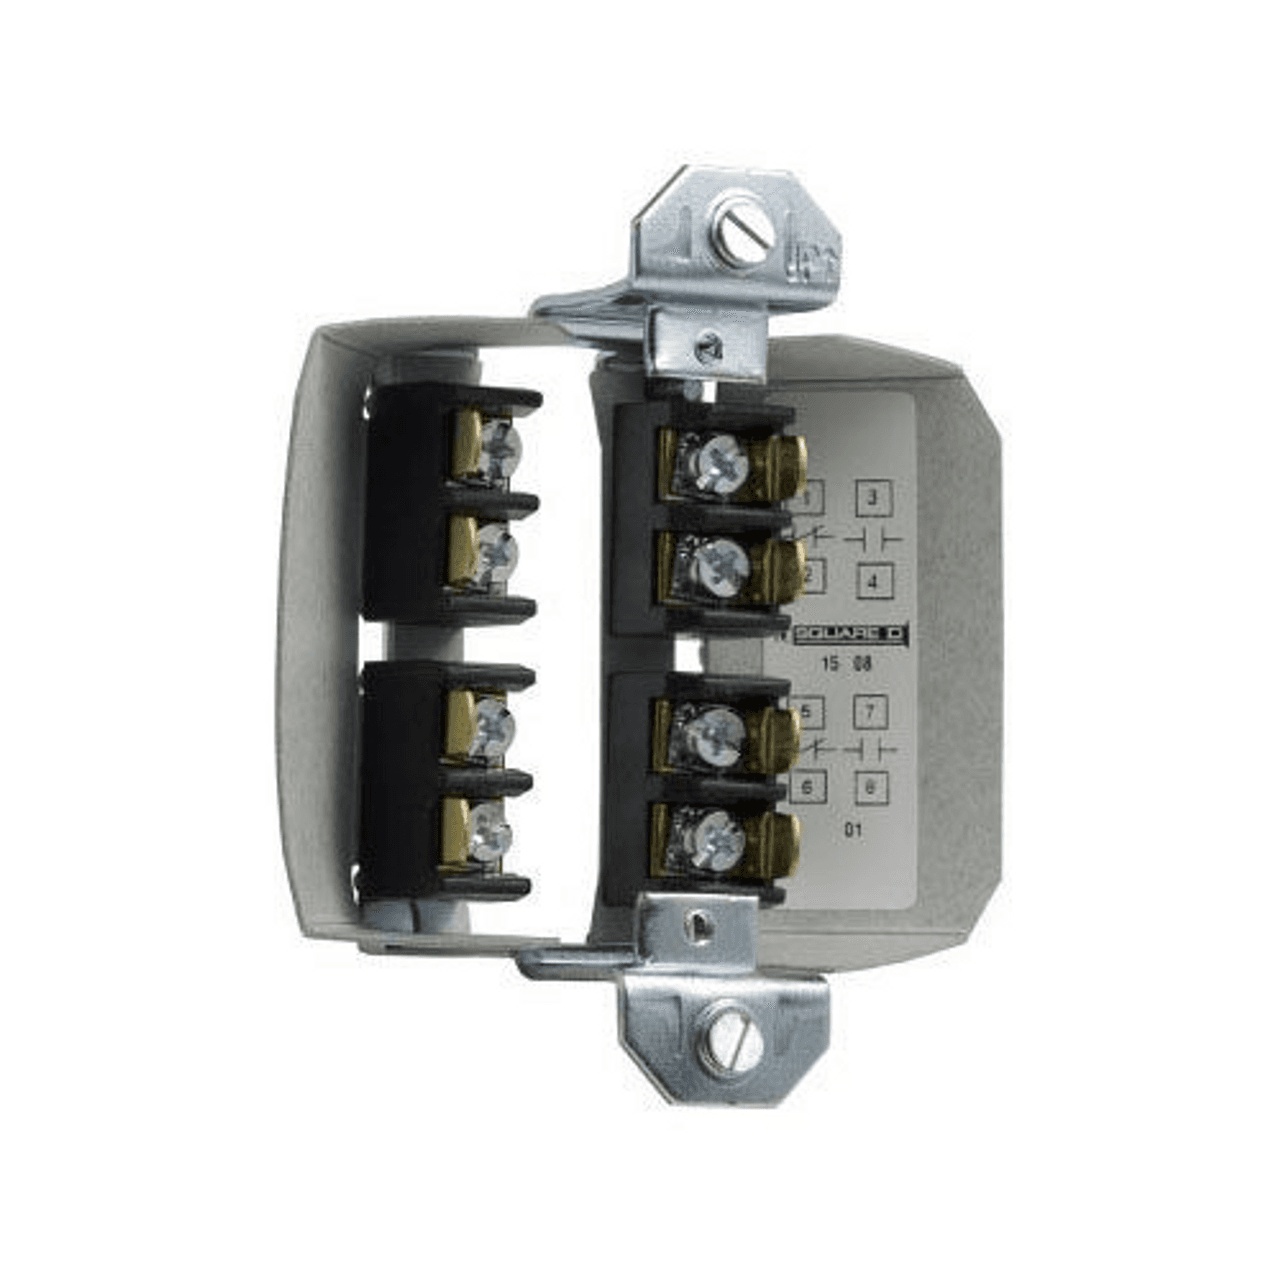 Schneider Electric 9001BFB214 Schneider Electric 9001BFB214 is a terminal block wiring receptacle designed for use in various electrical applications. This part facilitates the connection and organization of wires within a network, operating effectively at a network frequency of 9001B.